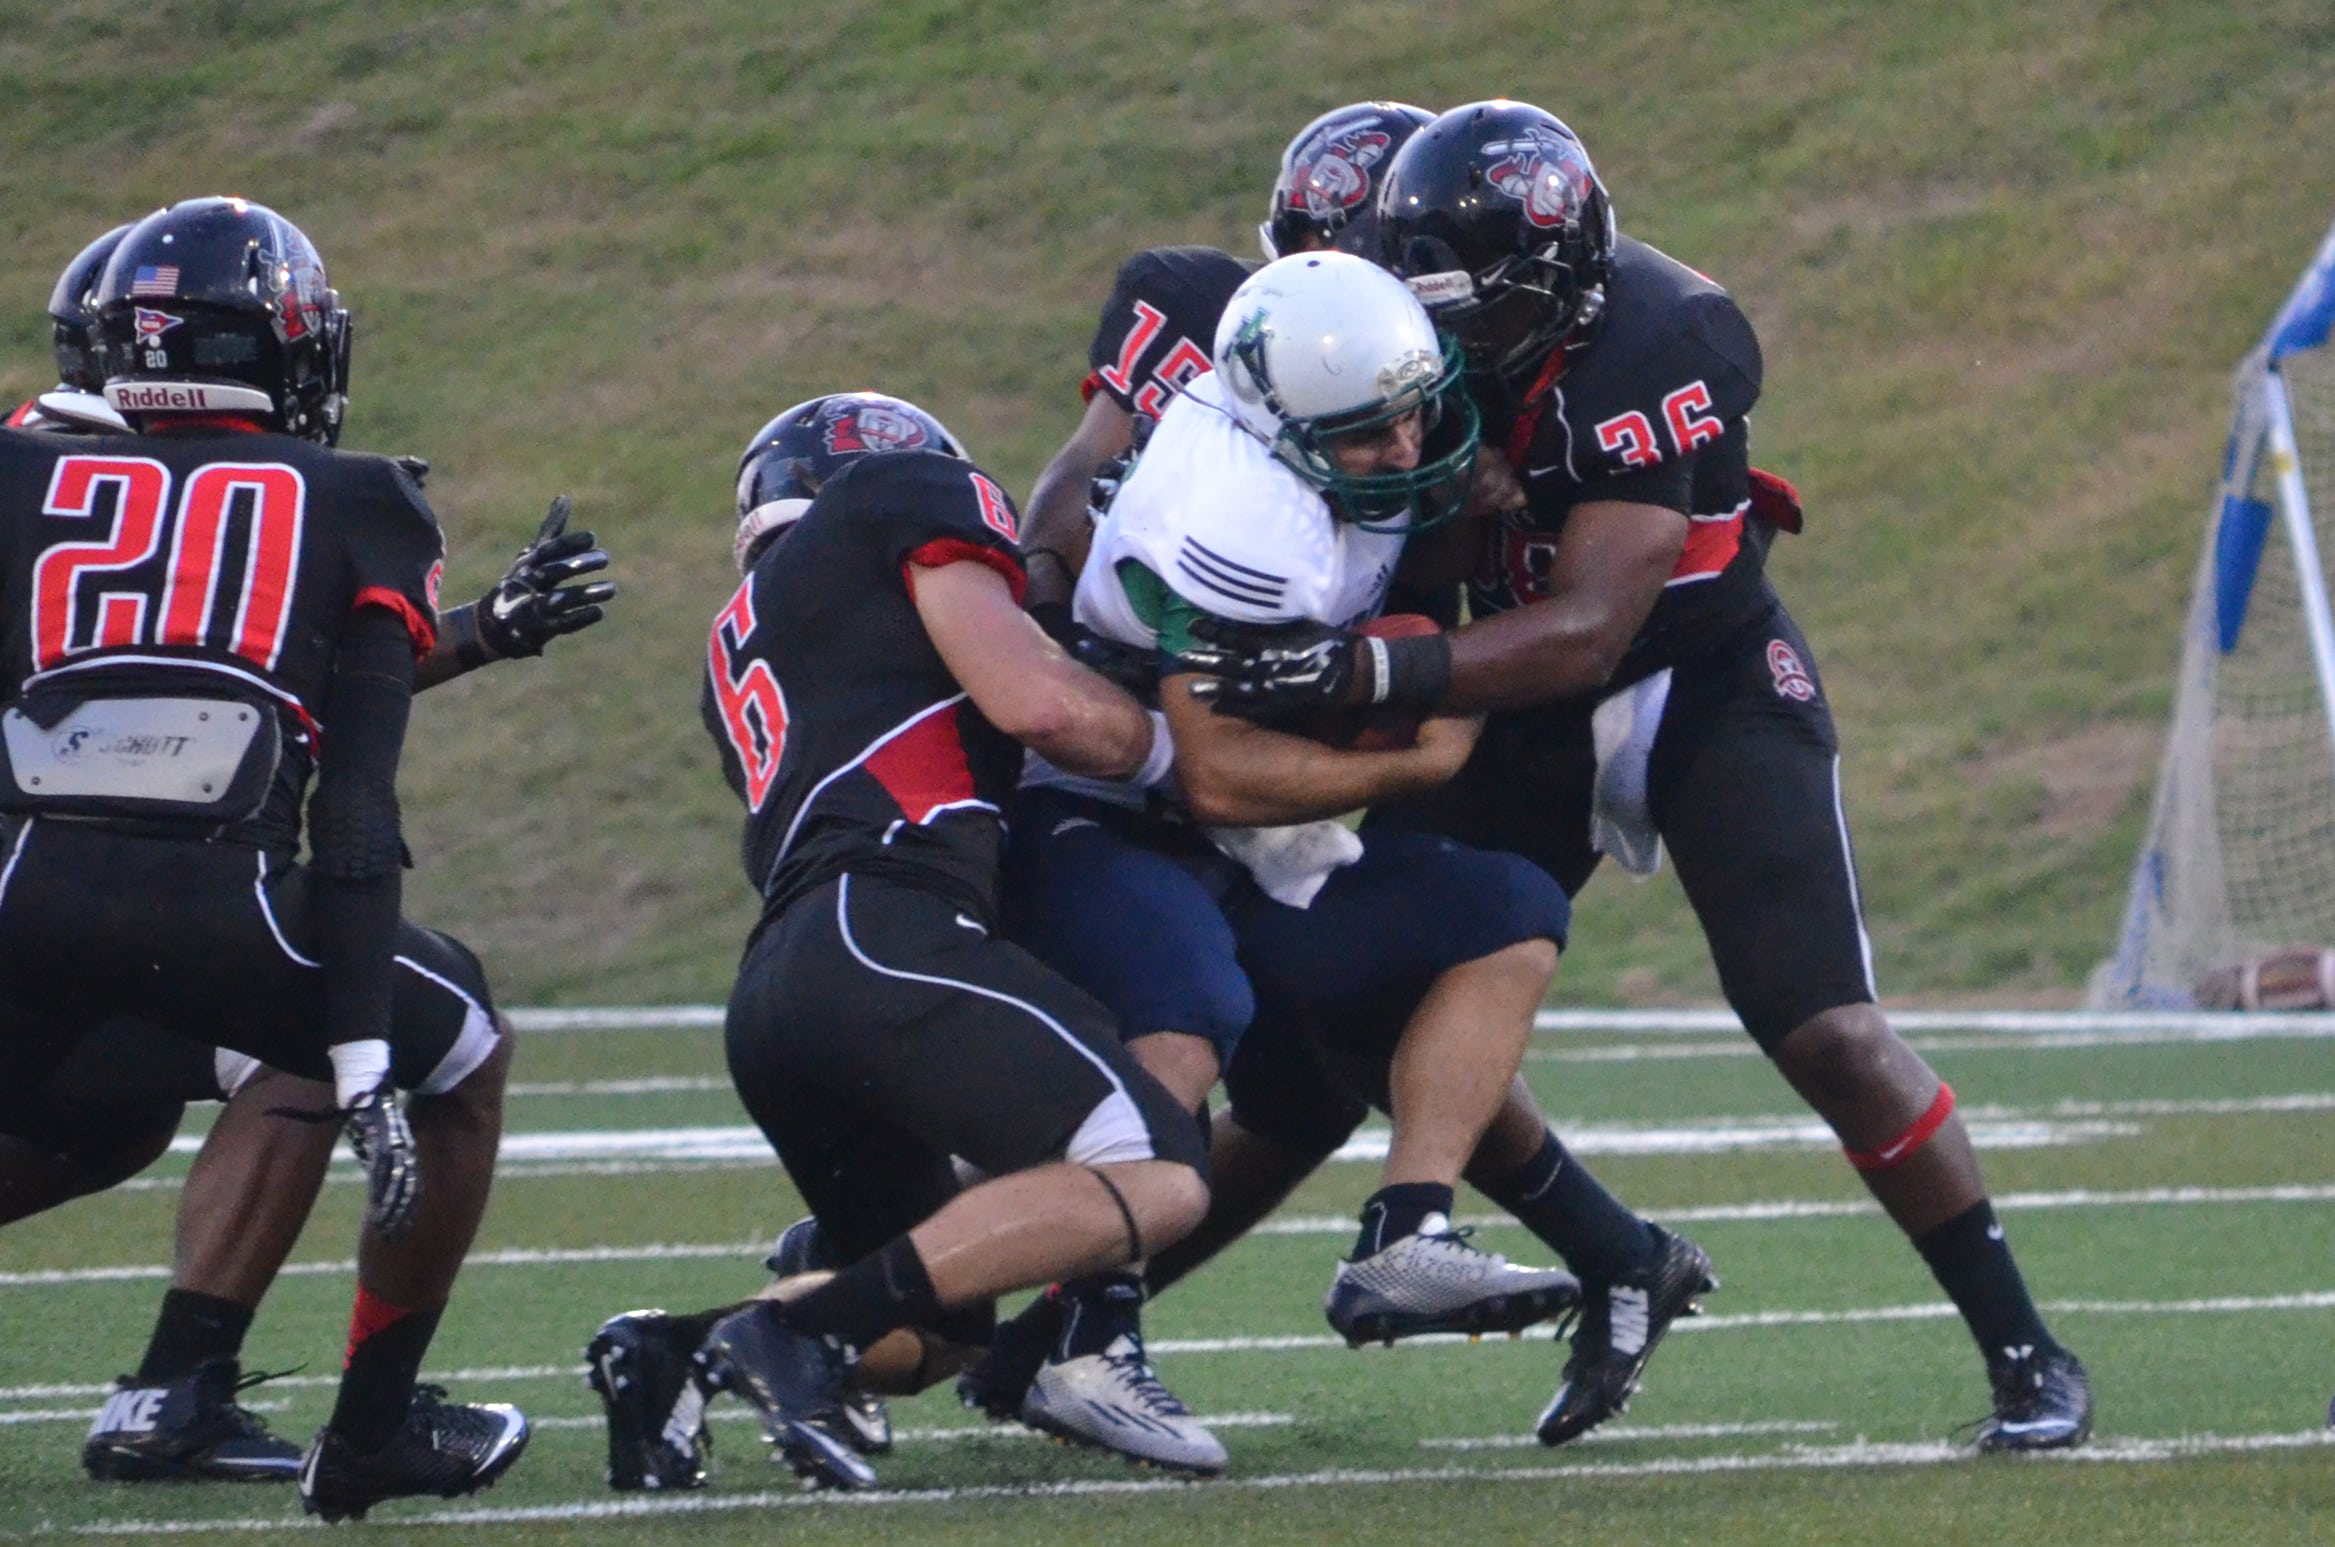  Taylor Anderson and Jalen Hammett work together to tackle an opposing team member 